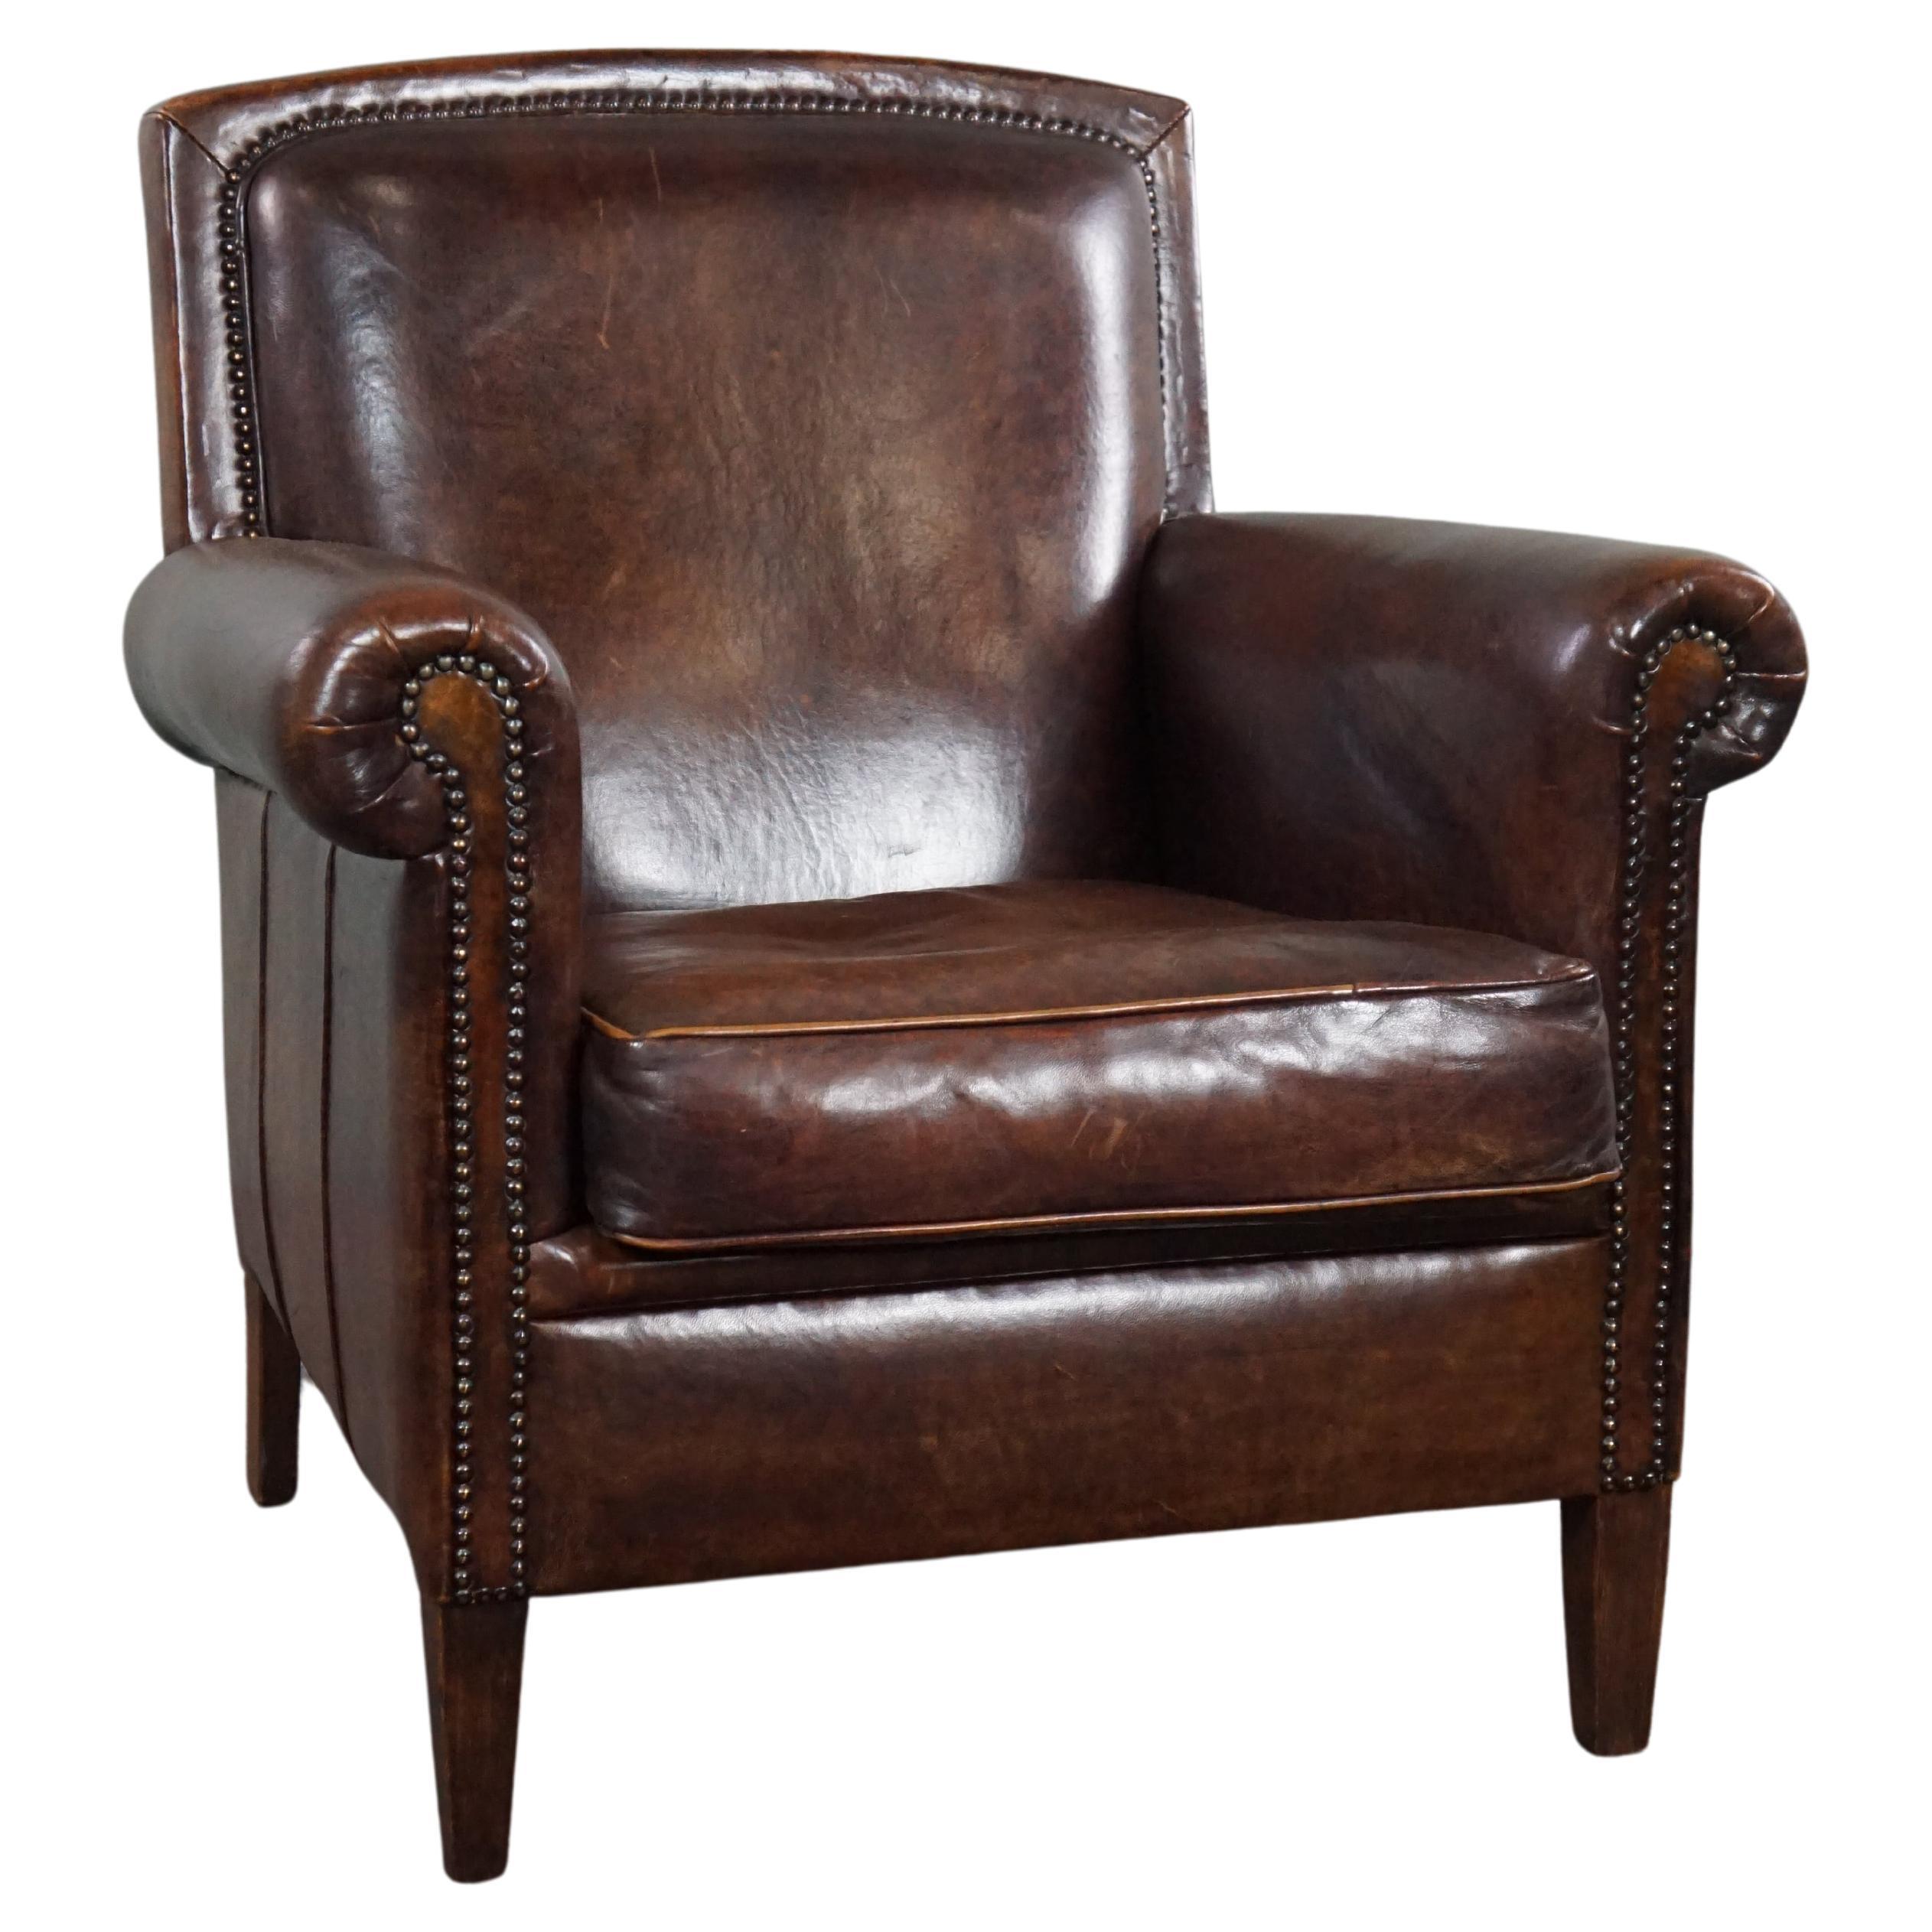 Aesthetically well thought out sheepskin armchair/armchair